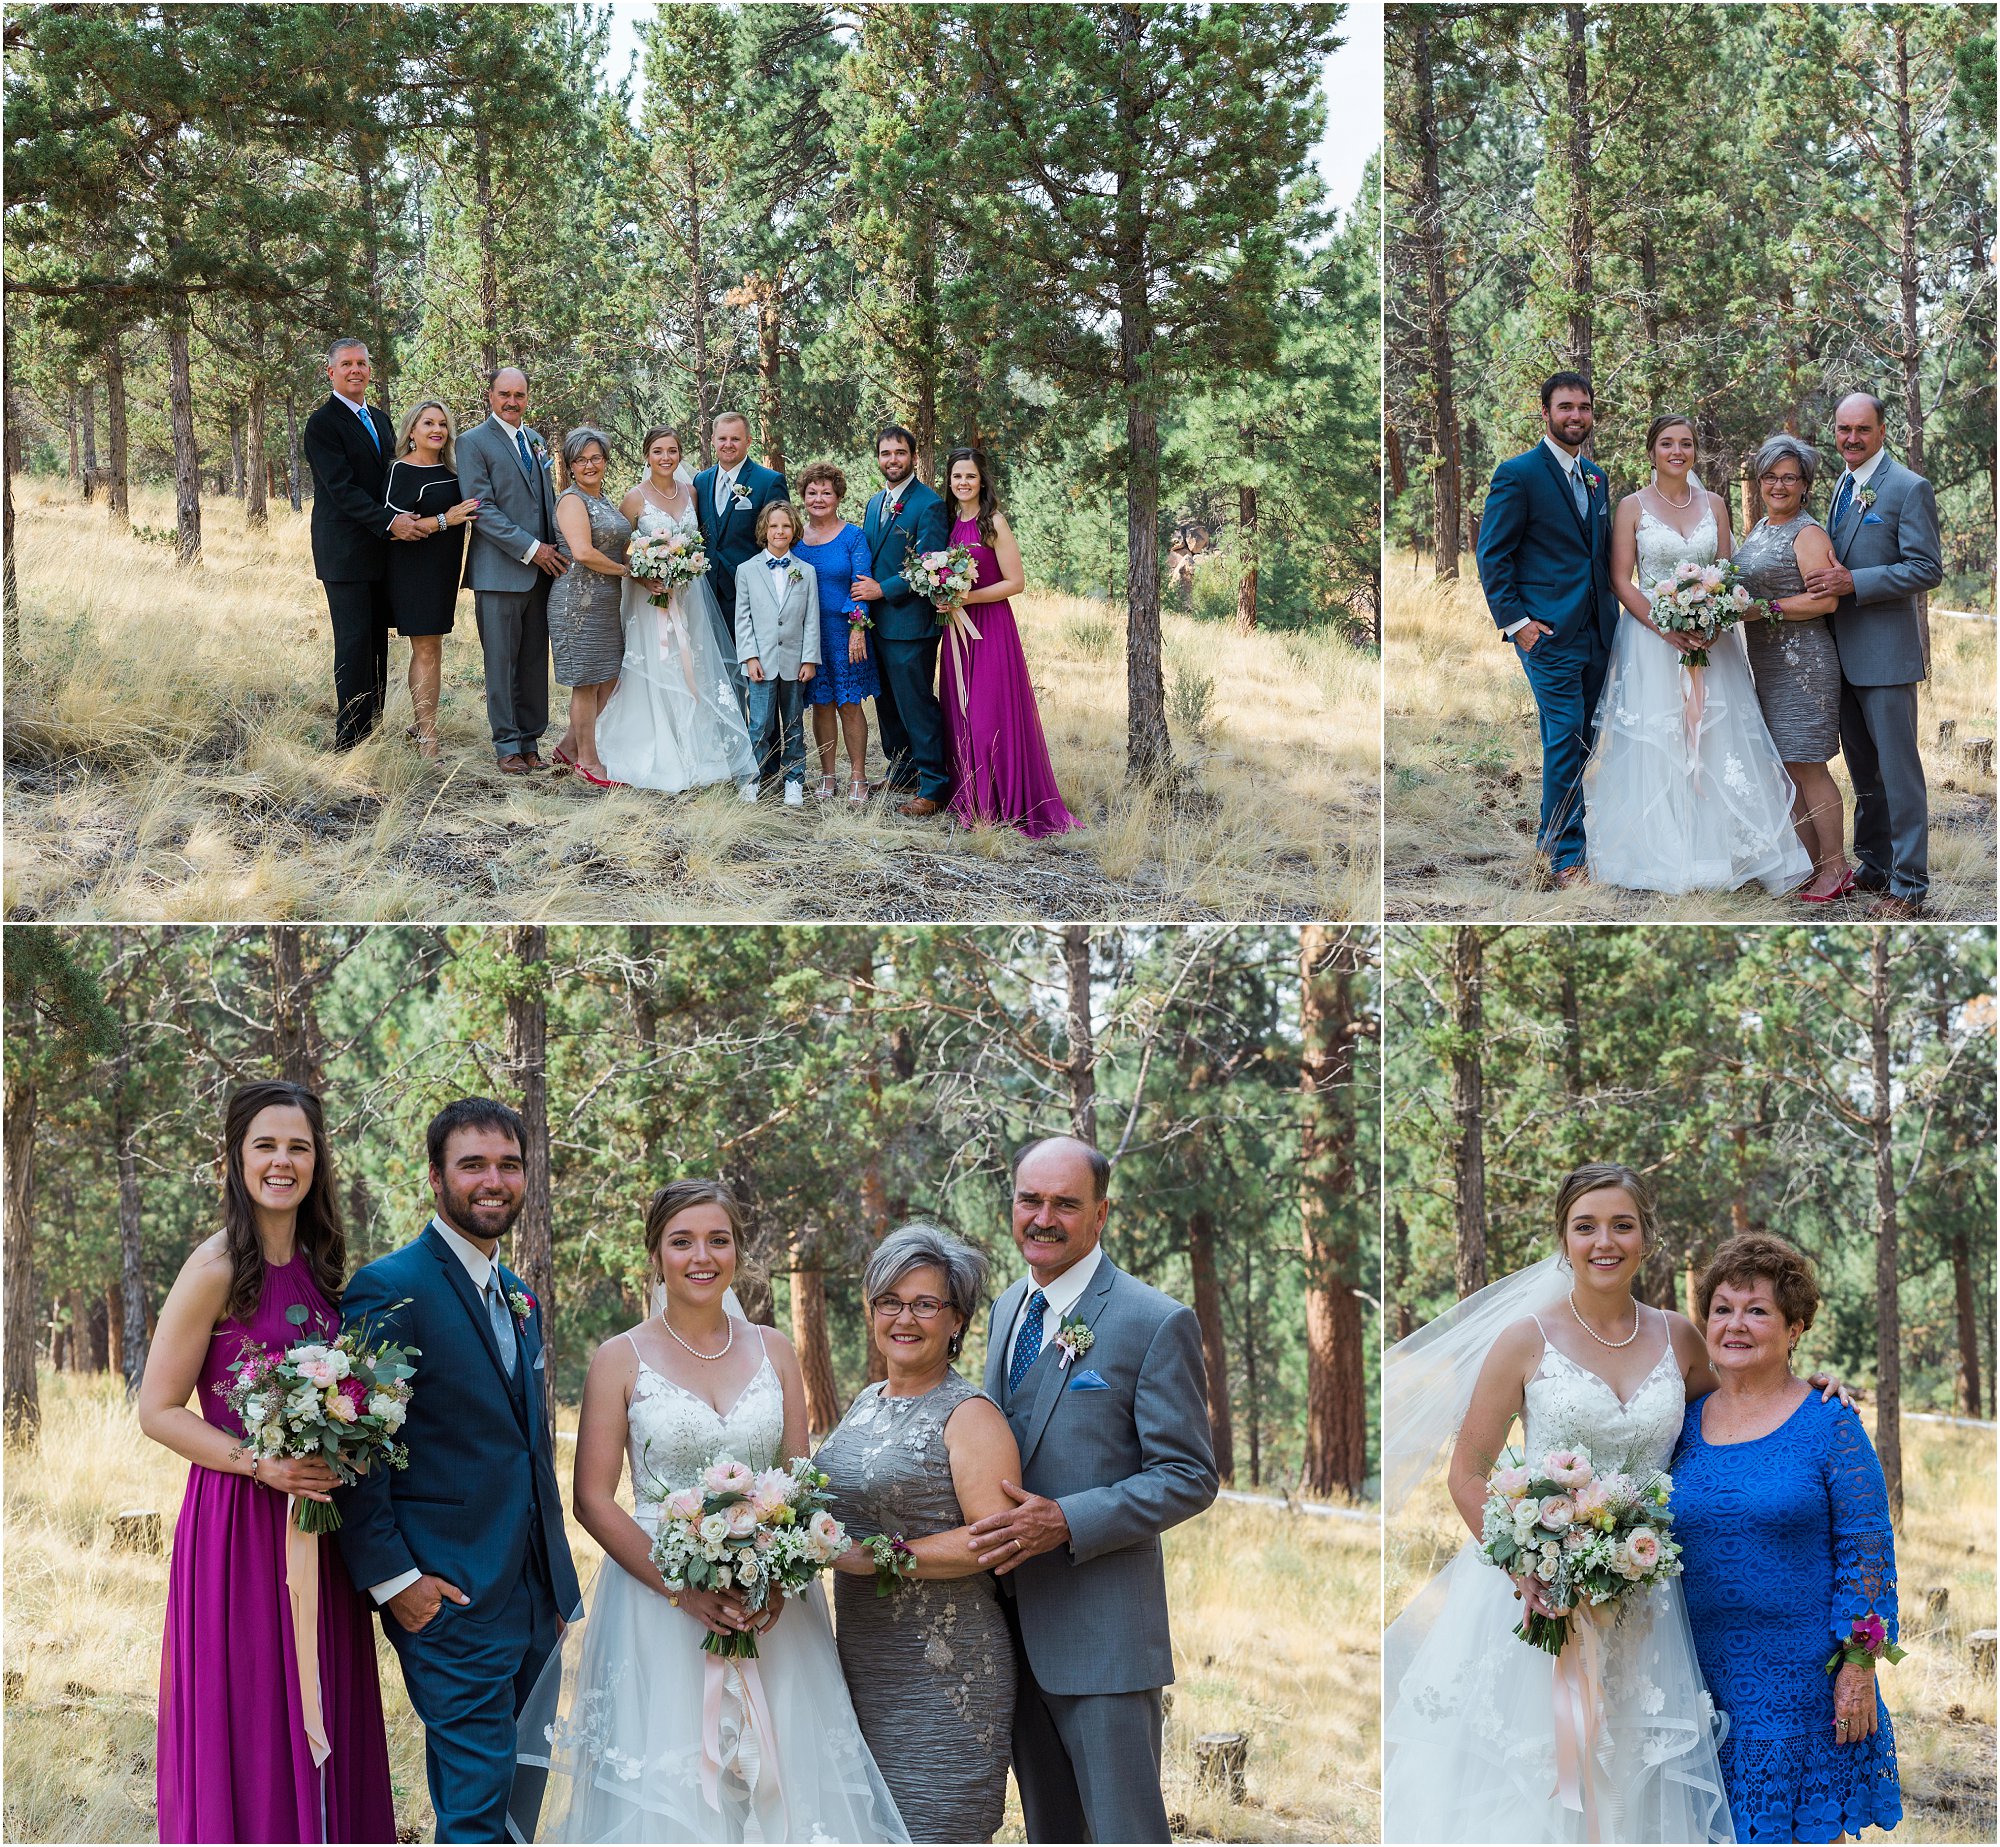 Beautiful family portraits at the rustic Rock Springs Ranch wedding venue in Bend, OR. | Erica Swantek Photography